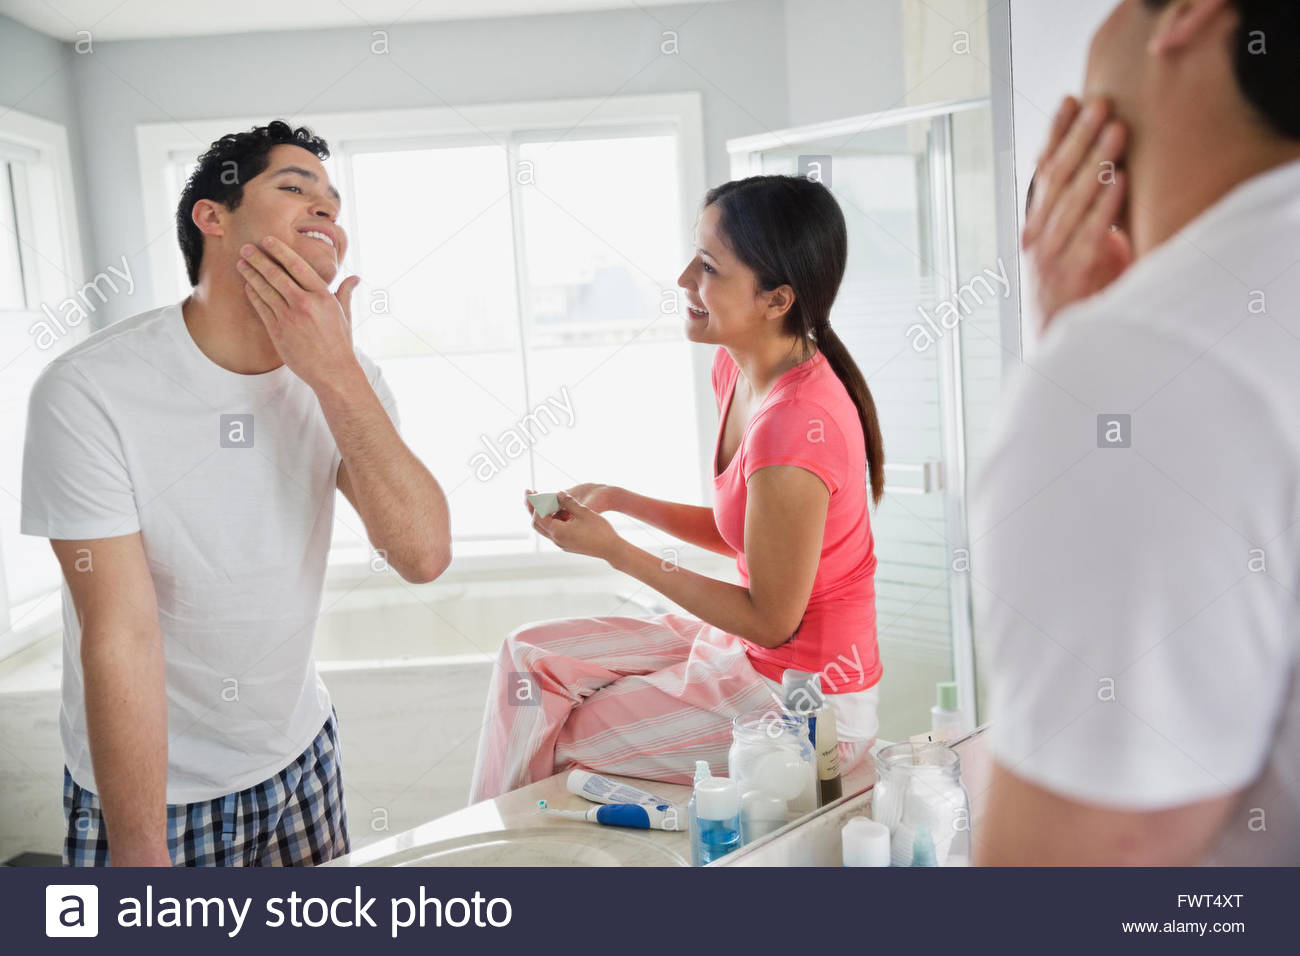 Man applying aftershave in bathroom Stock Photo